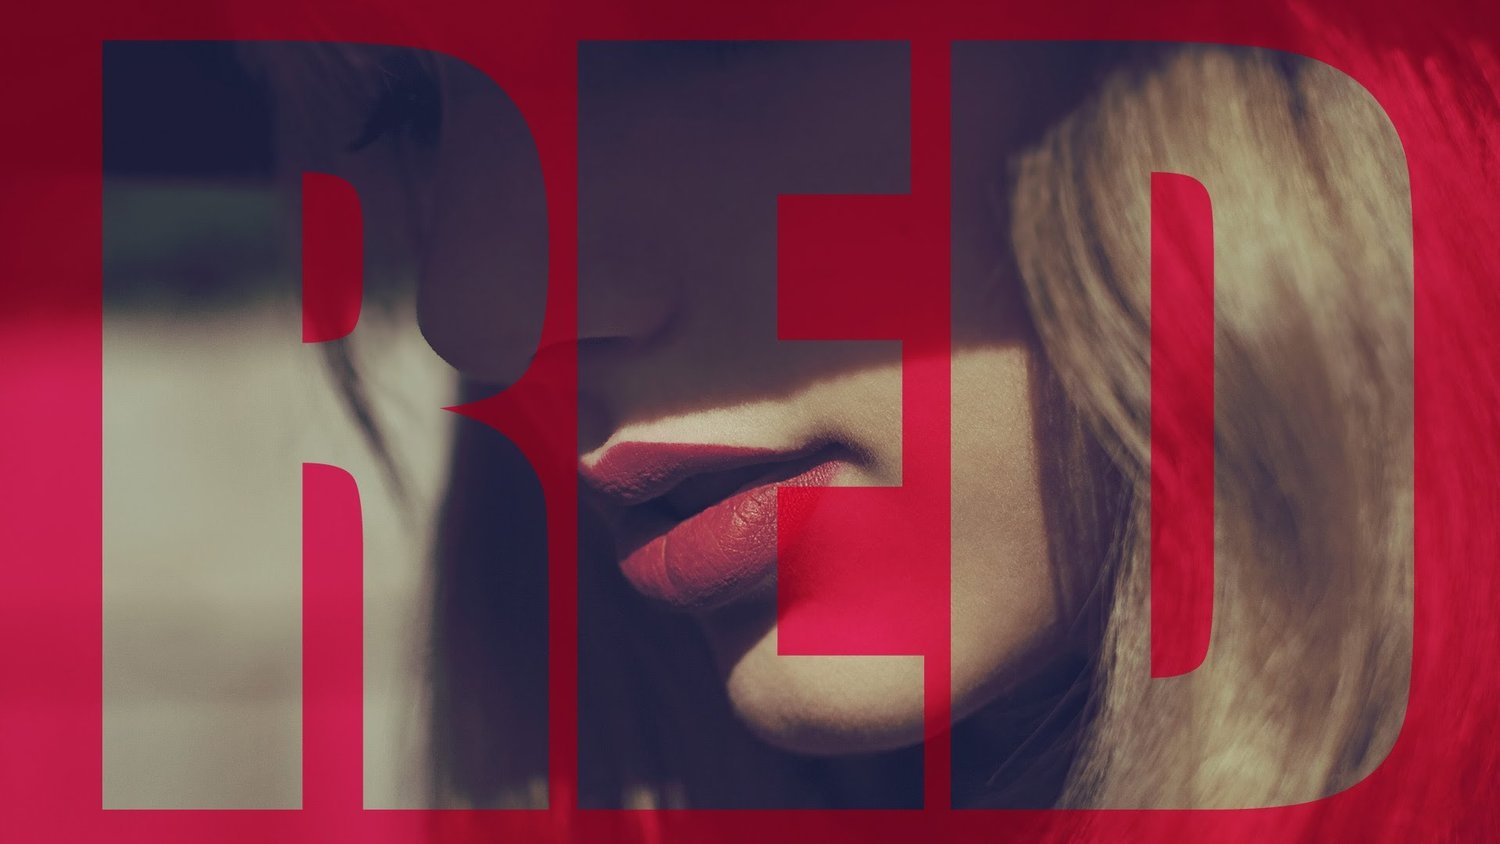 Taylor swift red full album subtitulado torrent third person controller opsive torrent